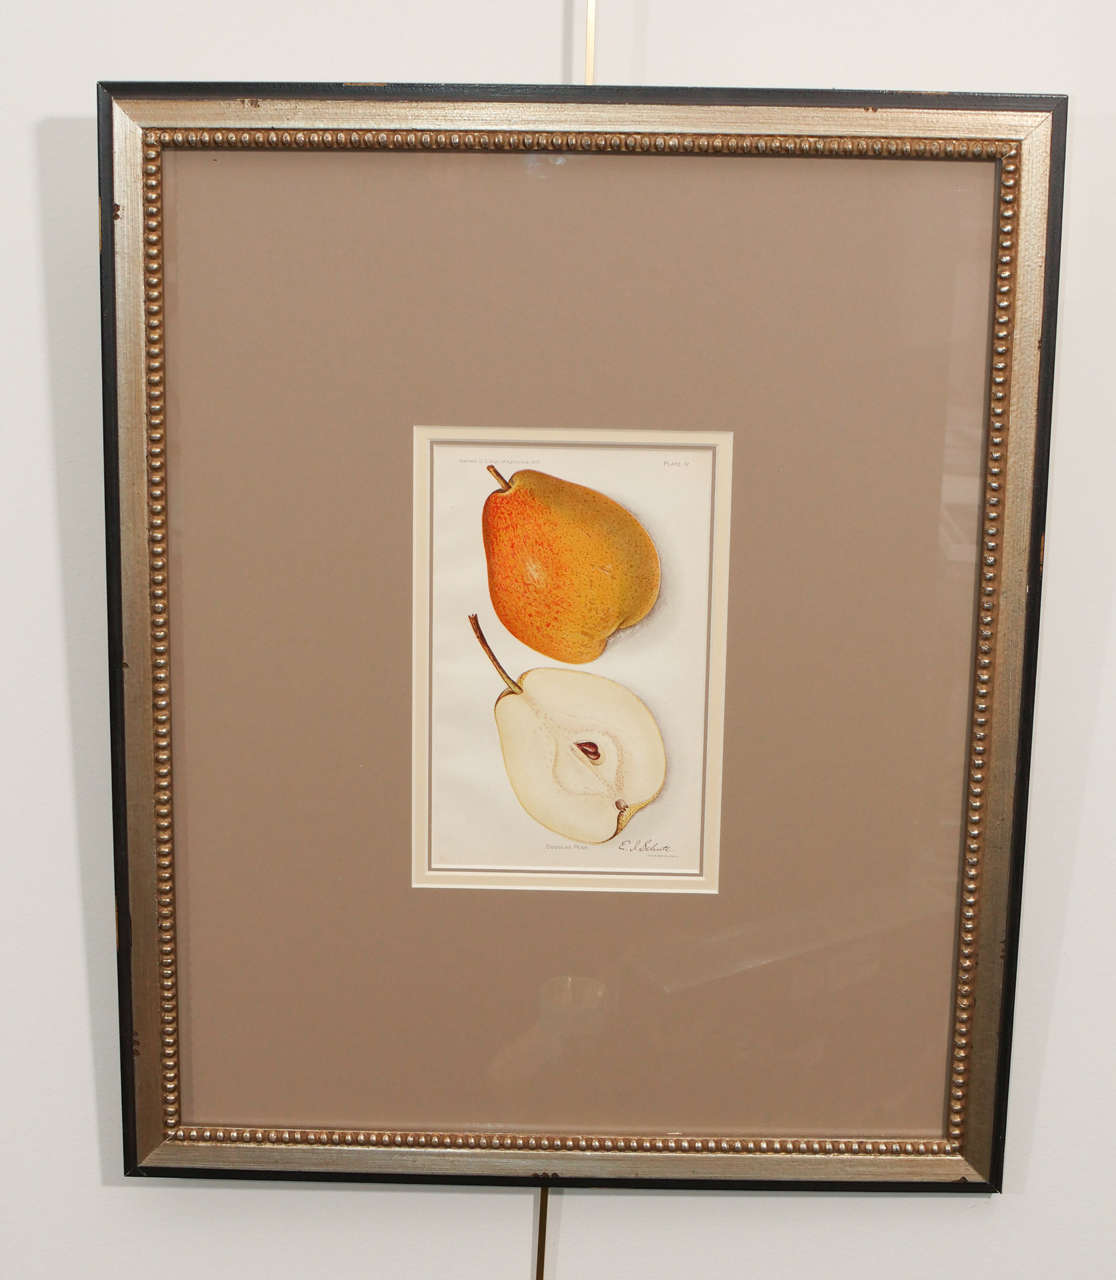 An architectural digest print of fruit, circa 1897-1914.